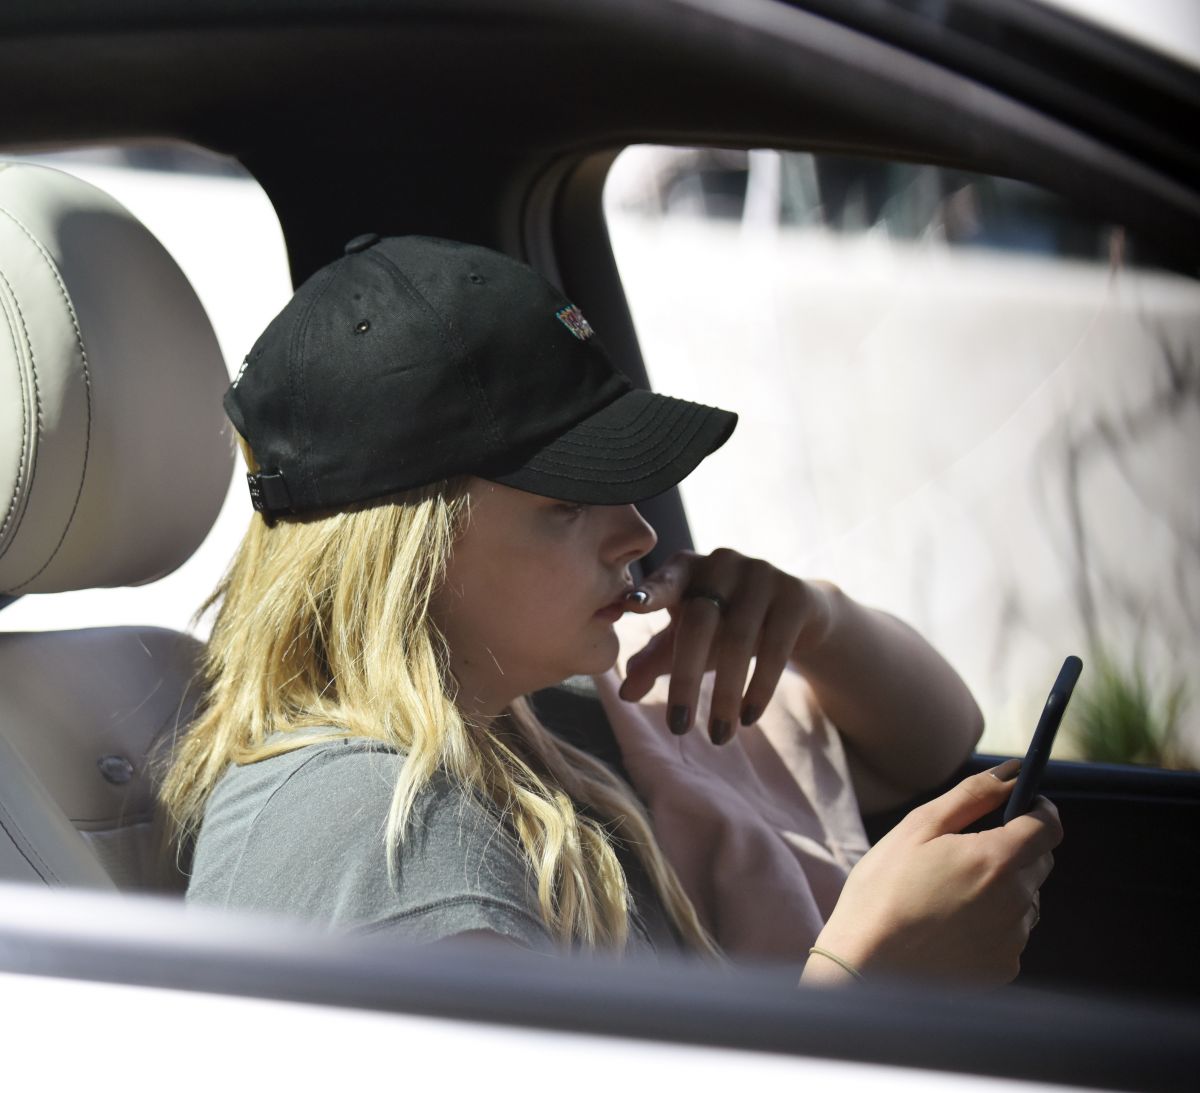 Chloe Moretz Chats Her Phone Near Her Home Los Angeles